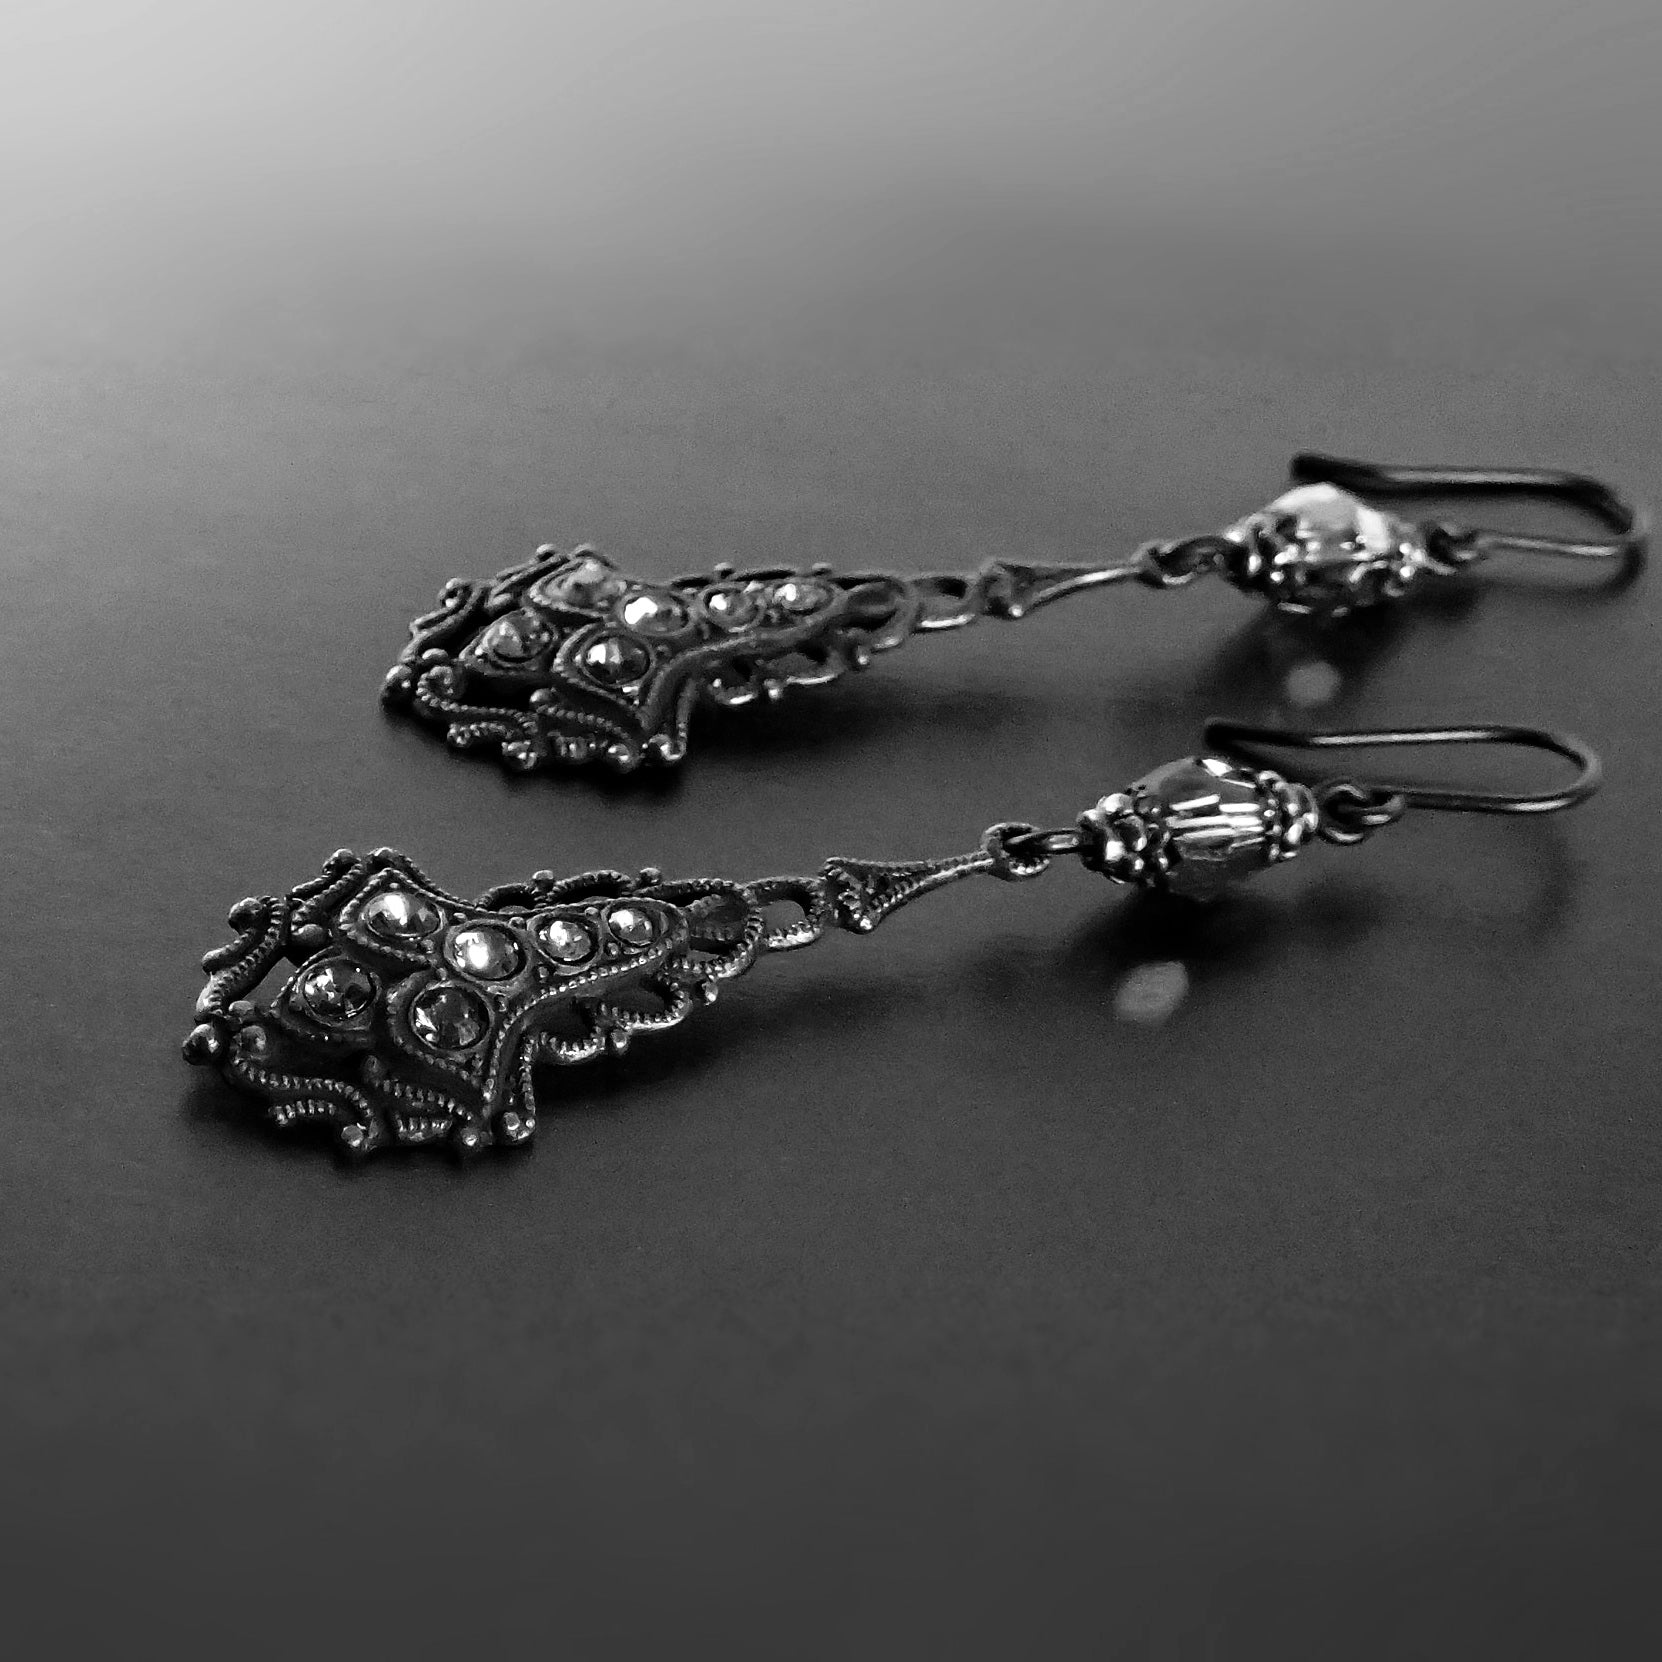 Victorian Gothic Earrings with Dark Metallic Silver Crystals